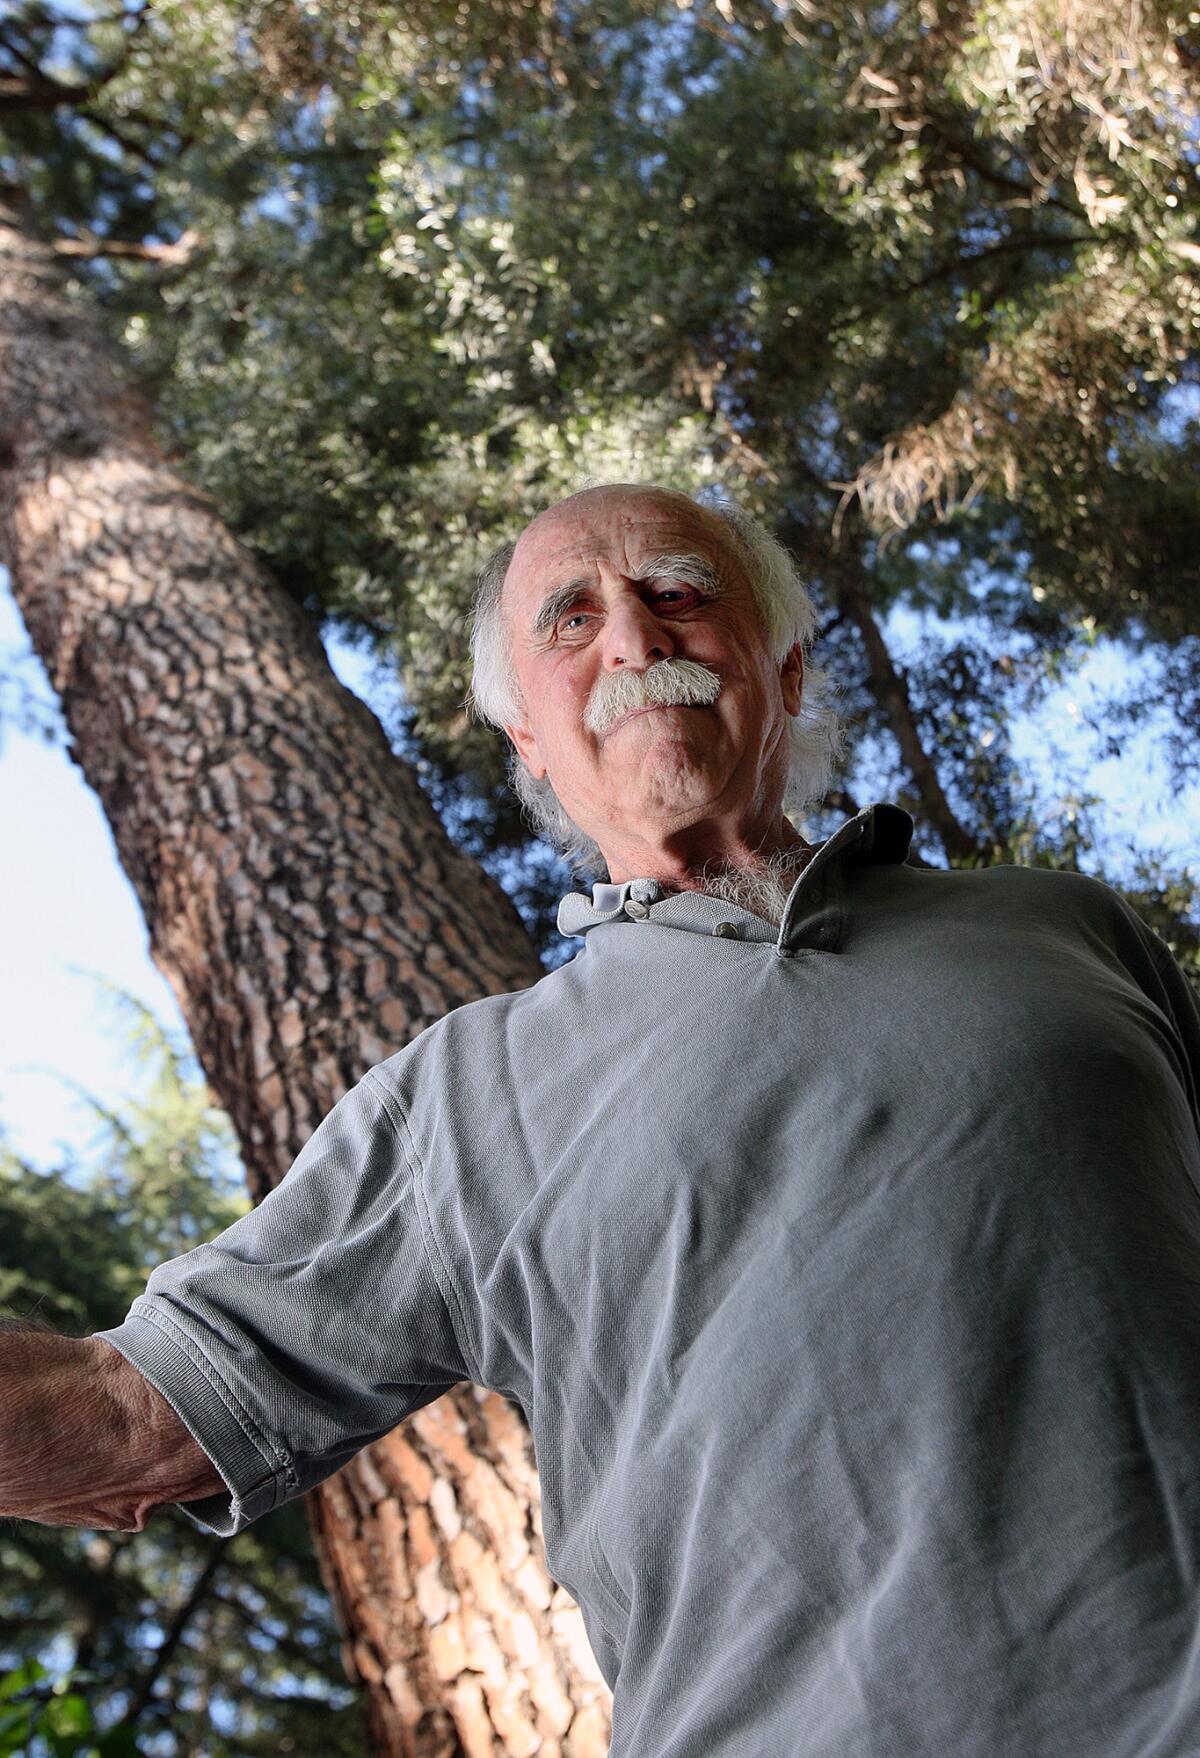 Longtime La Cañada Flintridge resident Larry Moss in his front yard beneath a Jeffrey pine on Monday, May 12, 2014. Moss is circulating a petition to repeal the city's tree ordinance, which he feels is too lax and does little to protect large, historic trees.